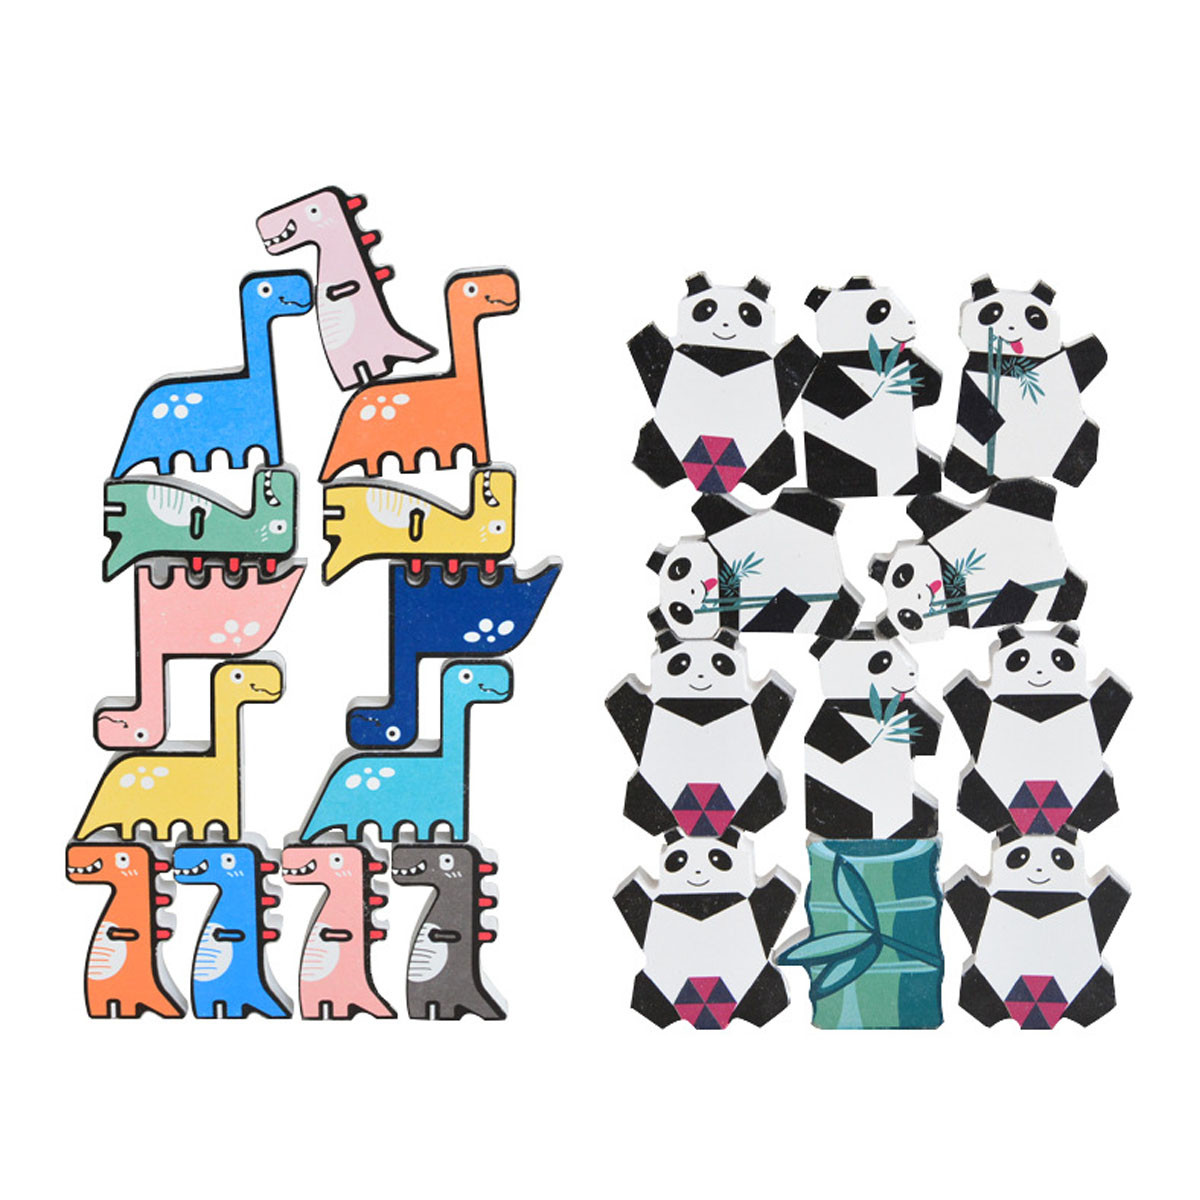 1113-Pcs-Creative-Panda-Dinosaur-Wooden-Stacking-Game-Building-Blocks-Early-Educational-Toy-for-Kids-1717485-3